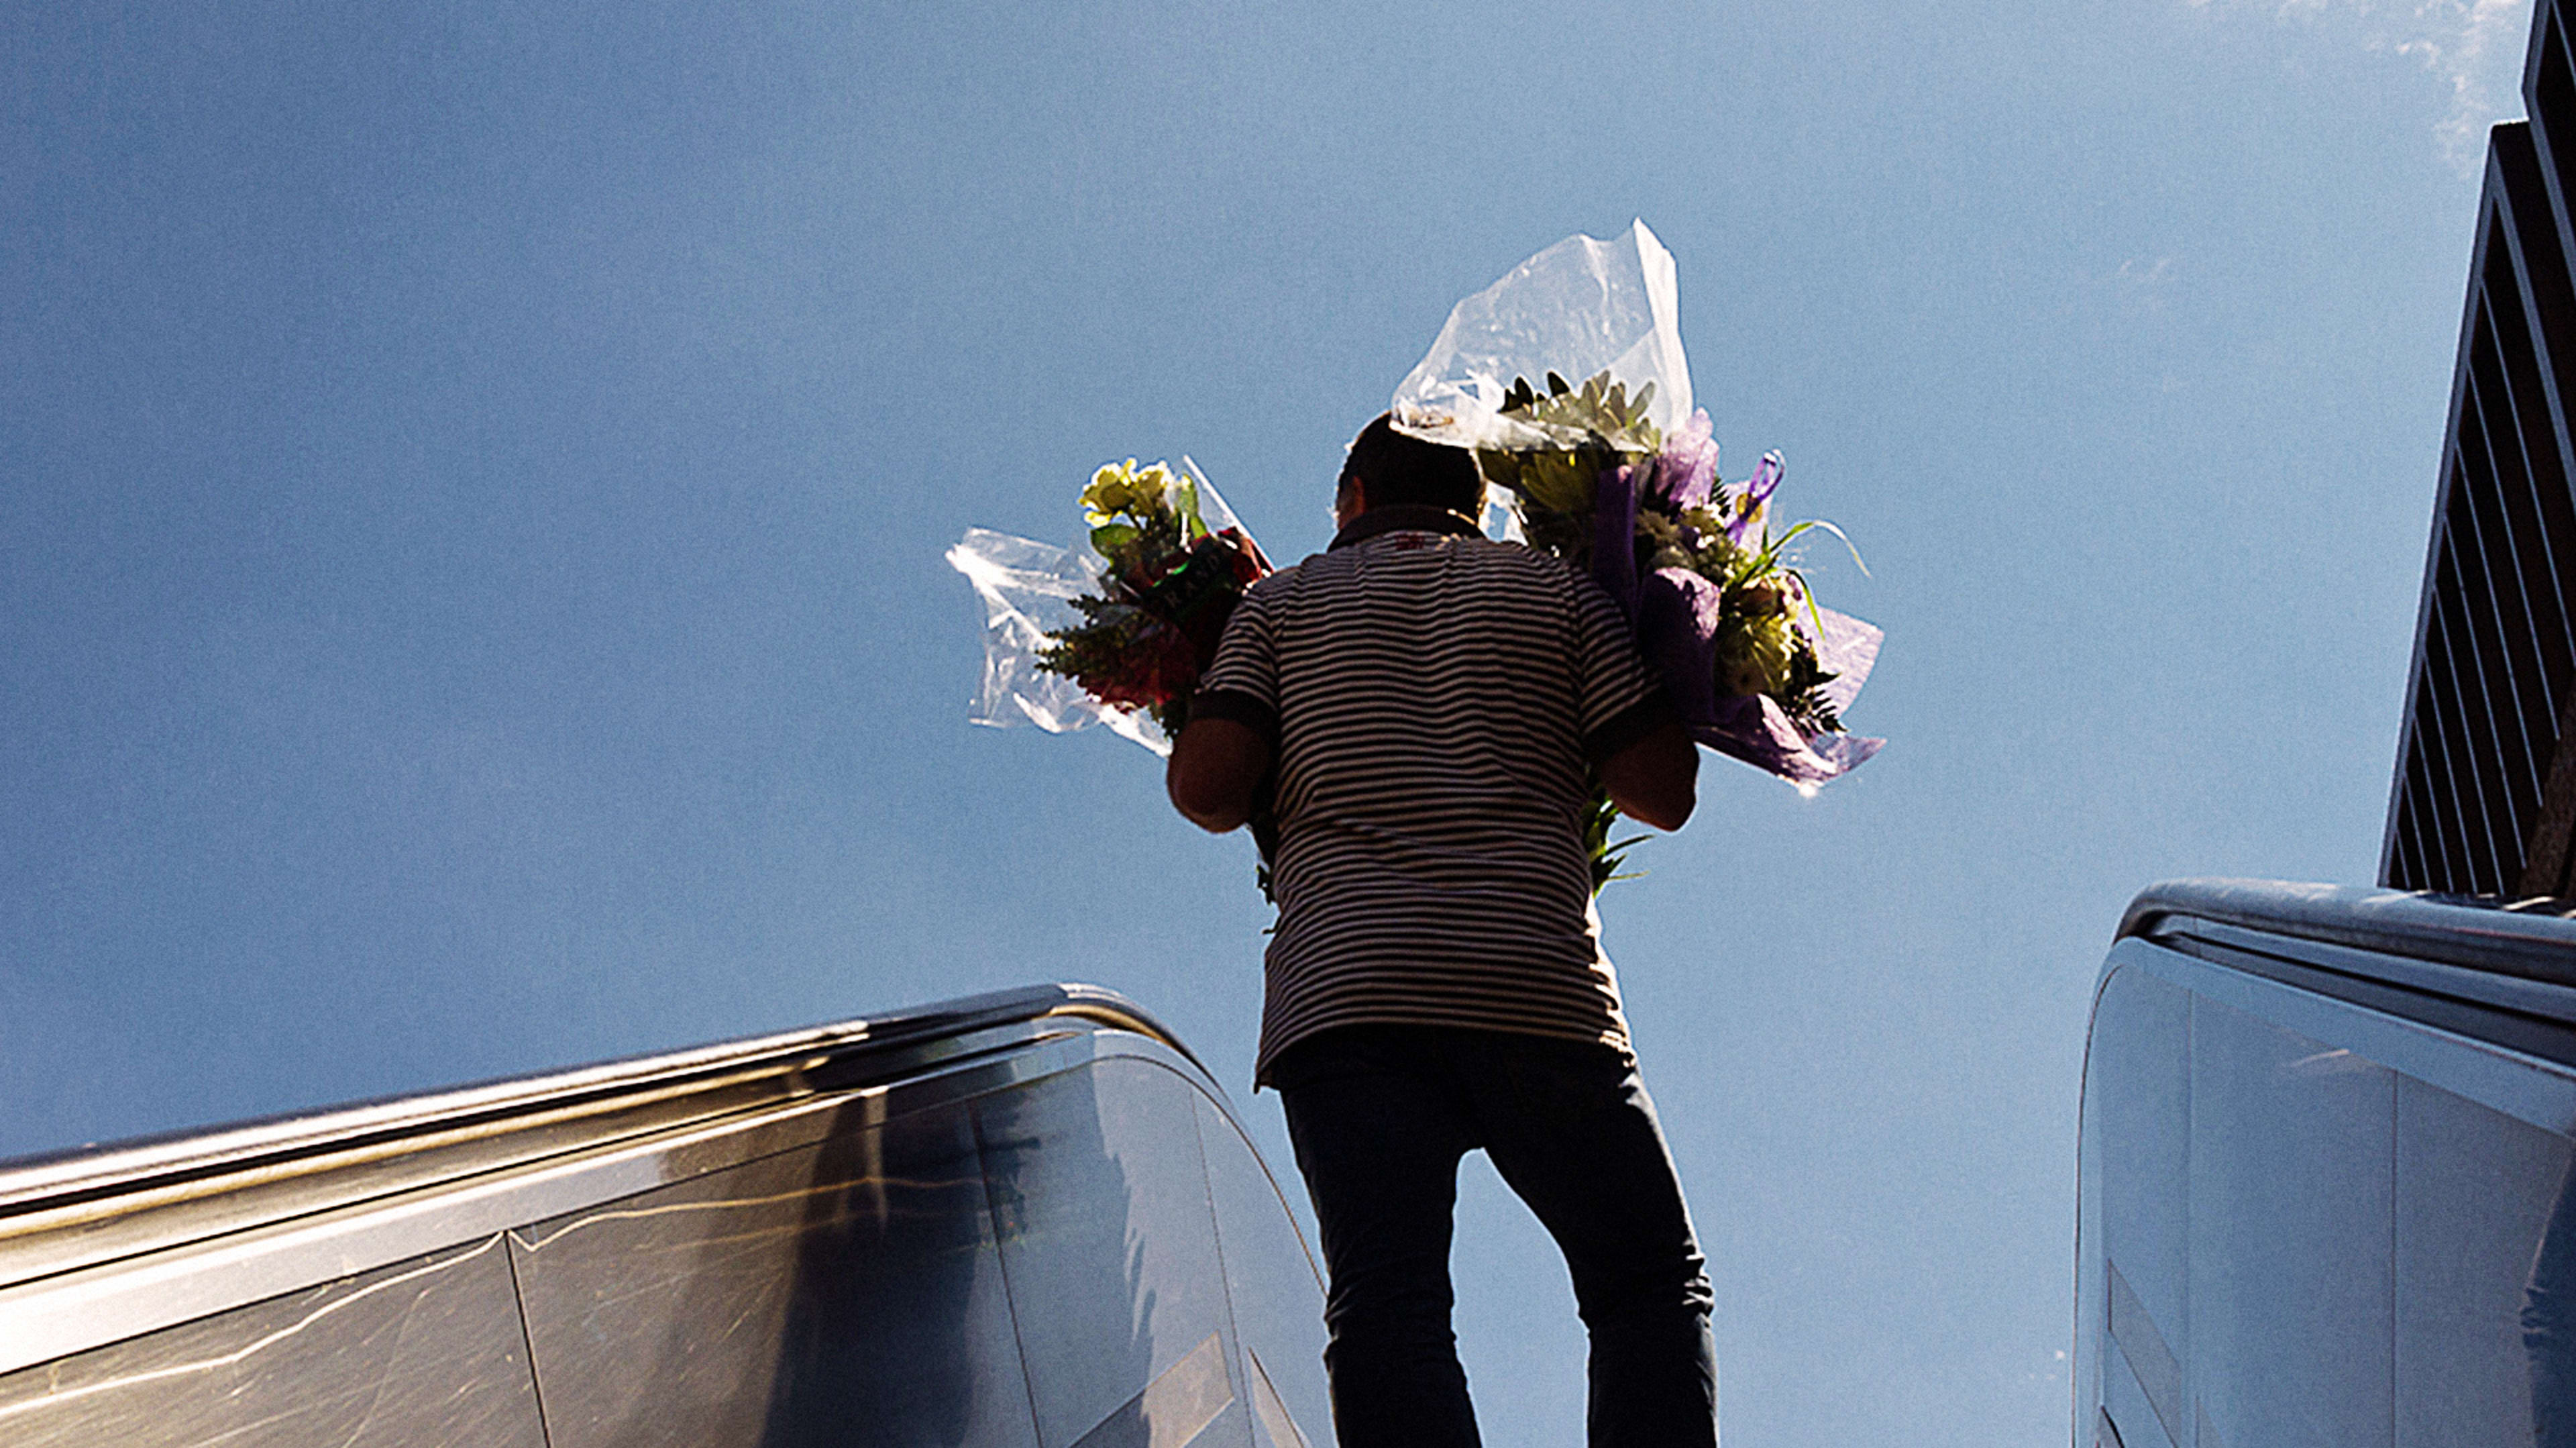 New Flower Delivery Startup UrbanStems Hopes To Bloom In New York